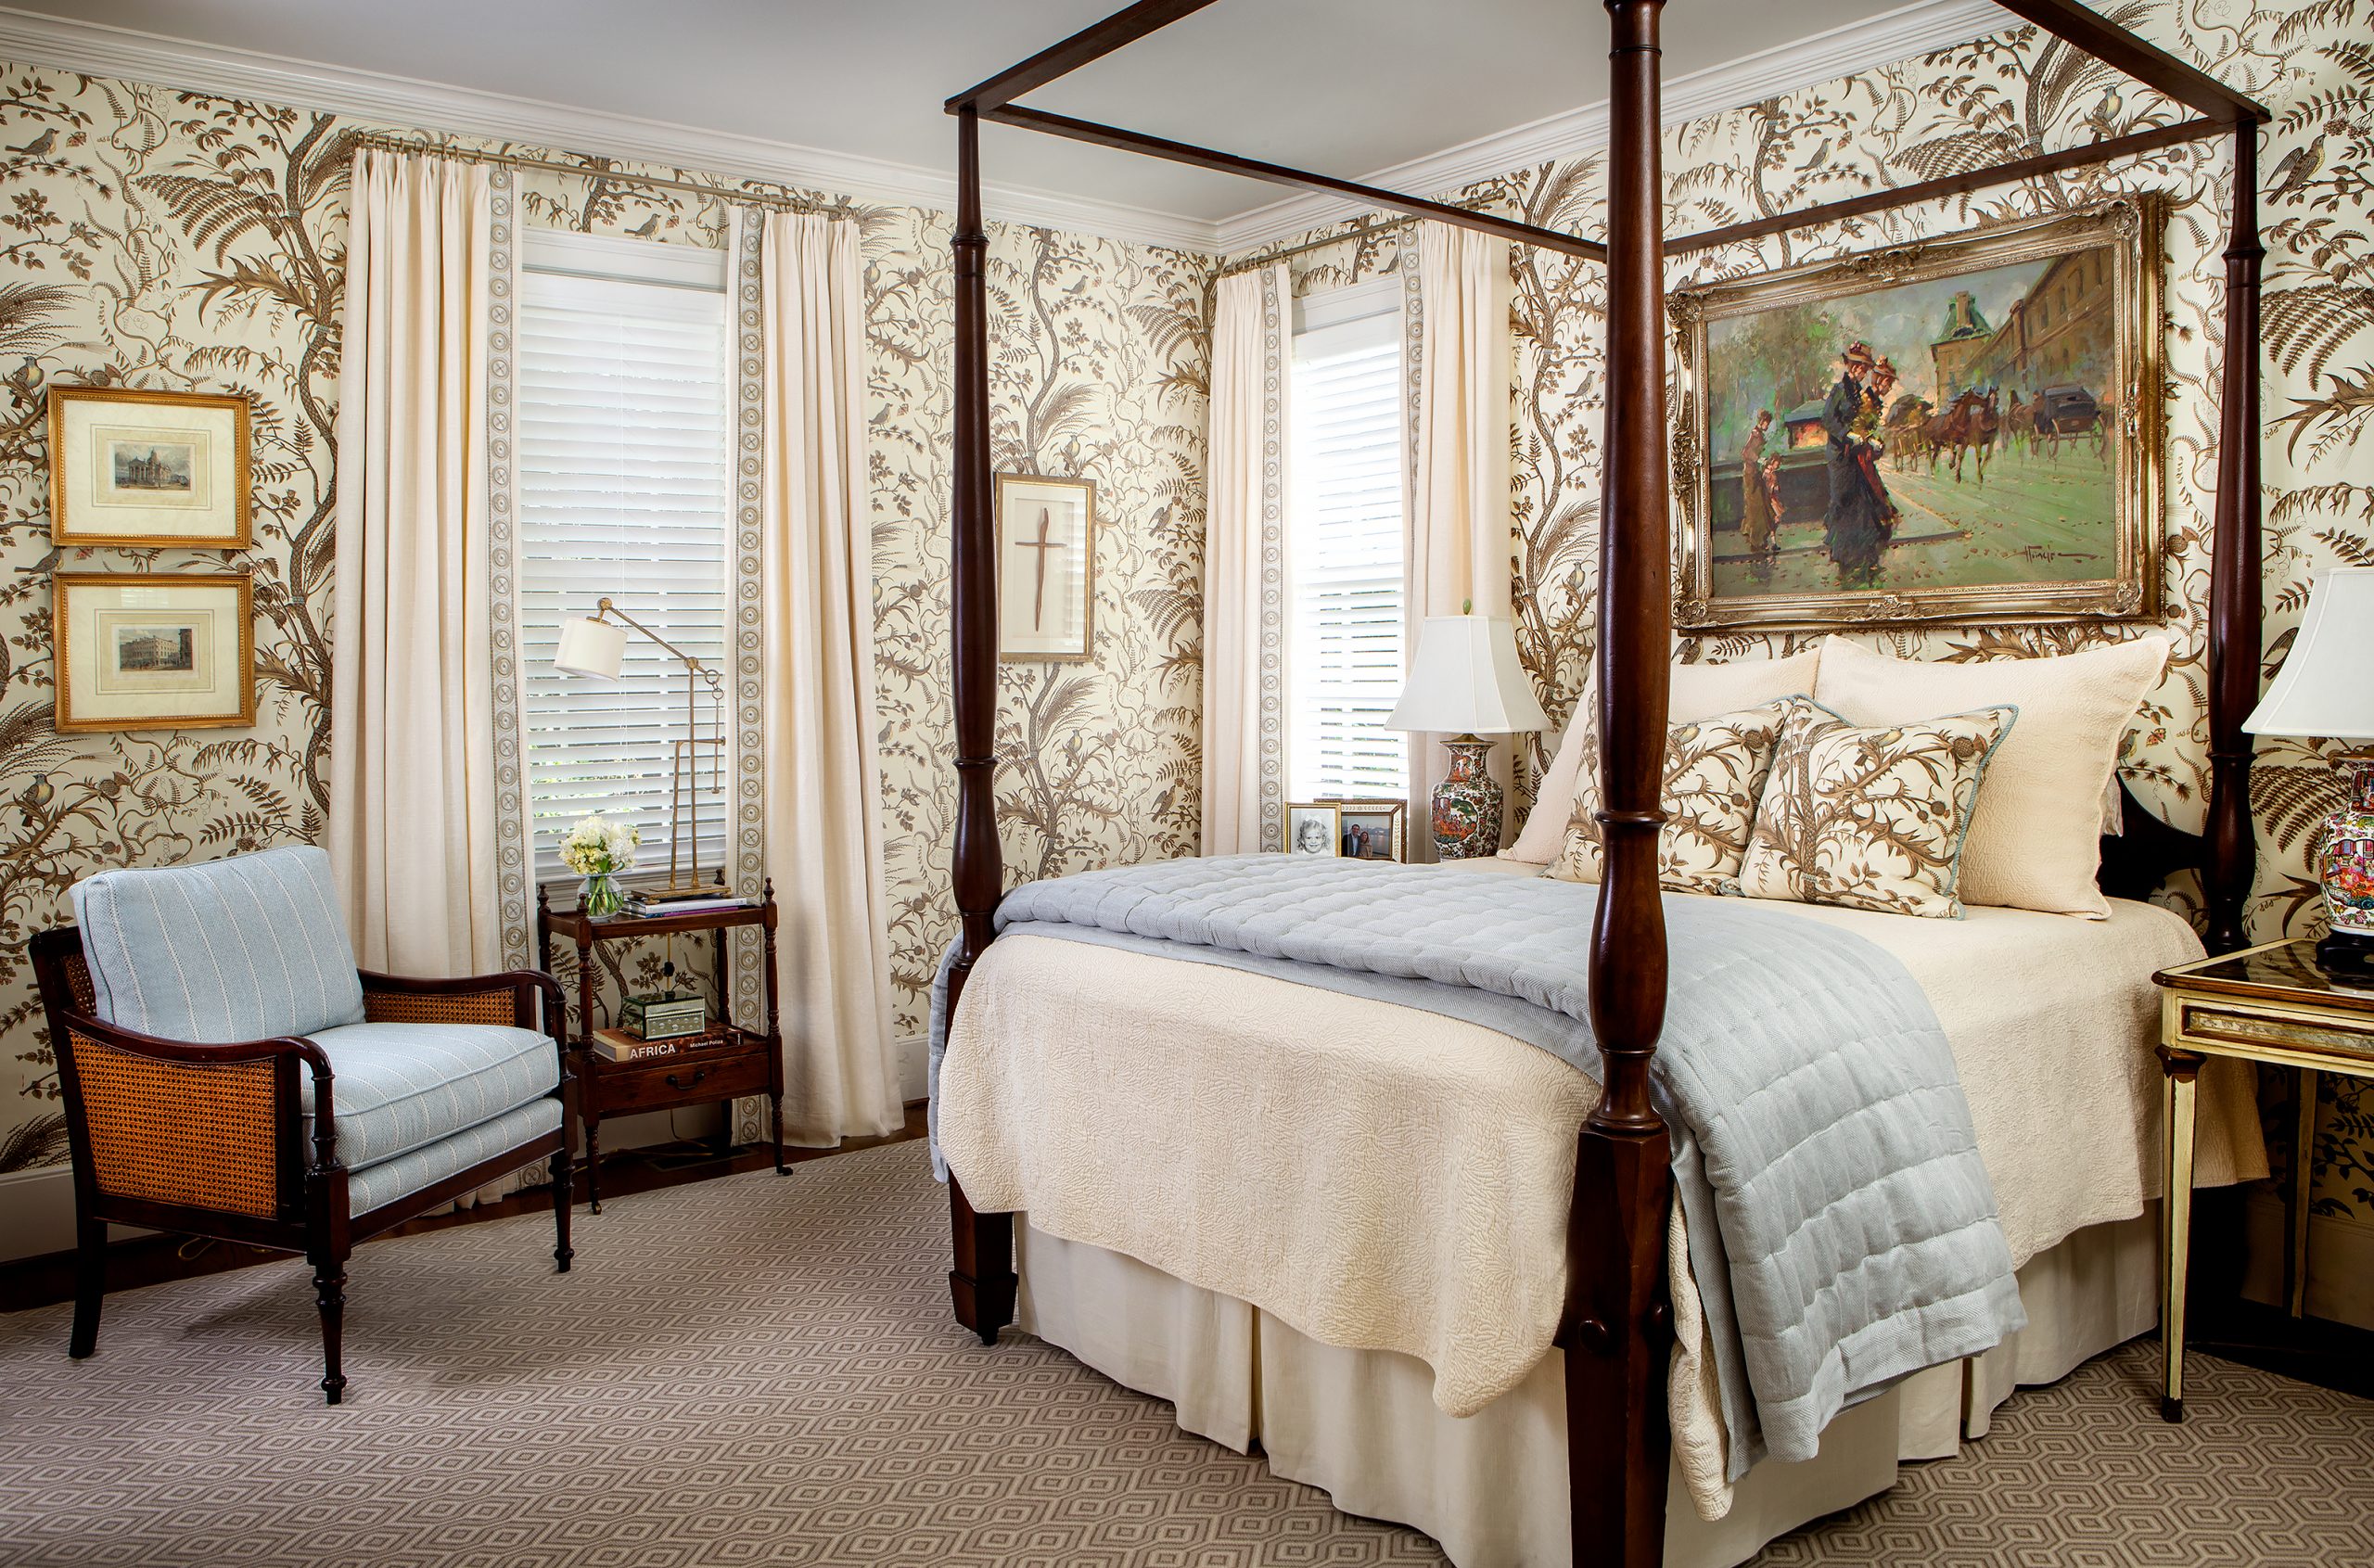 The guest bedroom is beautifully wrapped in Brunschwig & Fils Winterthur documentary wallcovering Bird & Thistle. Accenting the paper, an inviting mahogany canopy bed is dressed in a cream matelassé coverlet with pale blue tufted blanket and throw pillows.